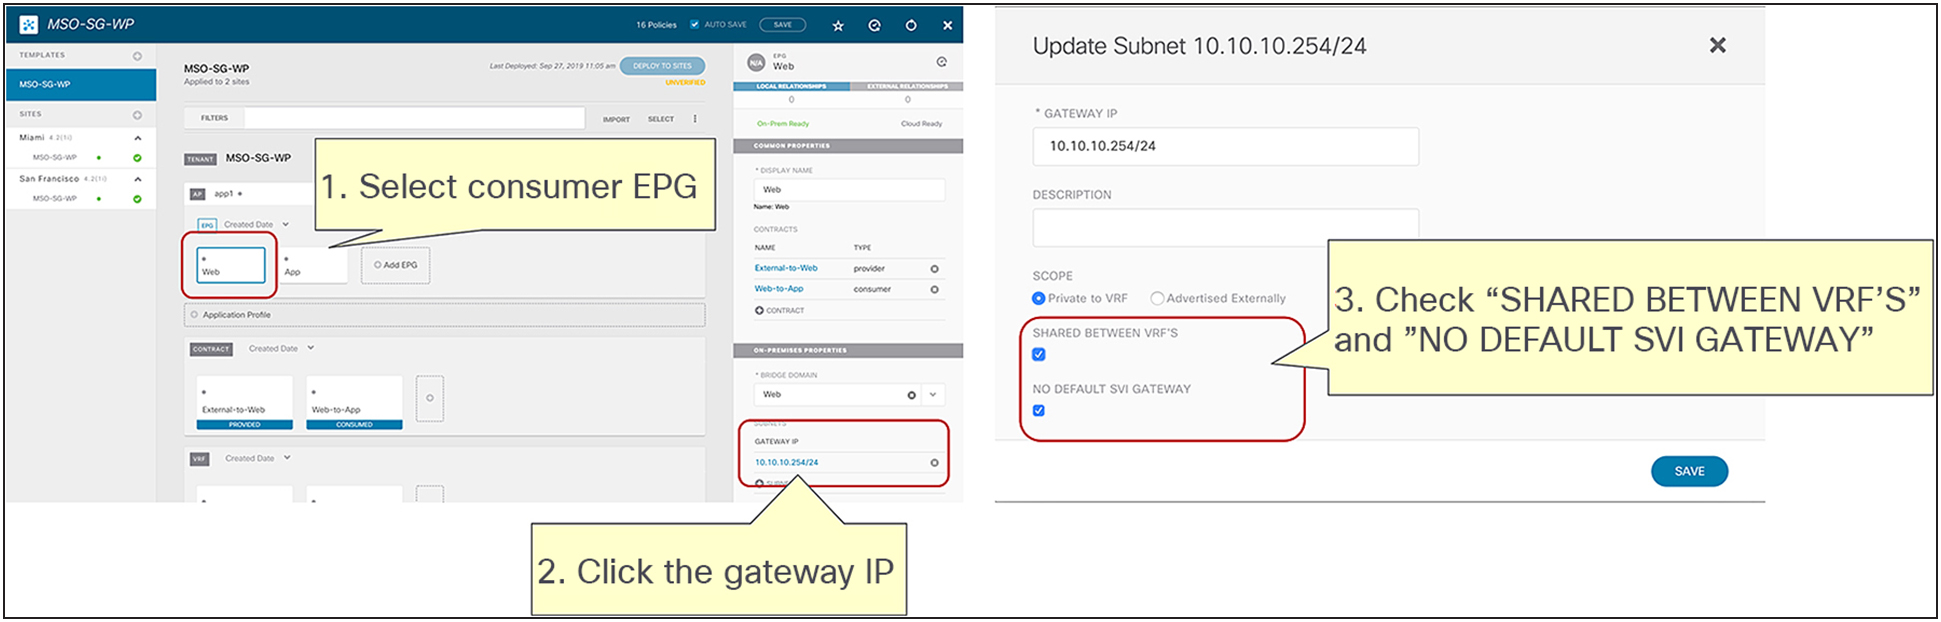 Select the gateway IP object